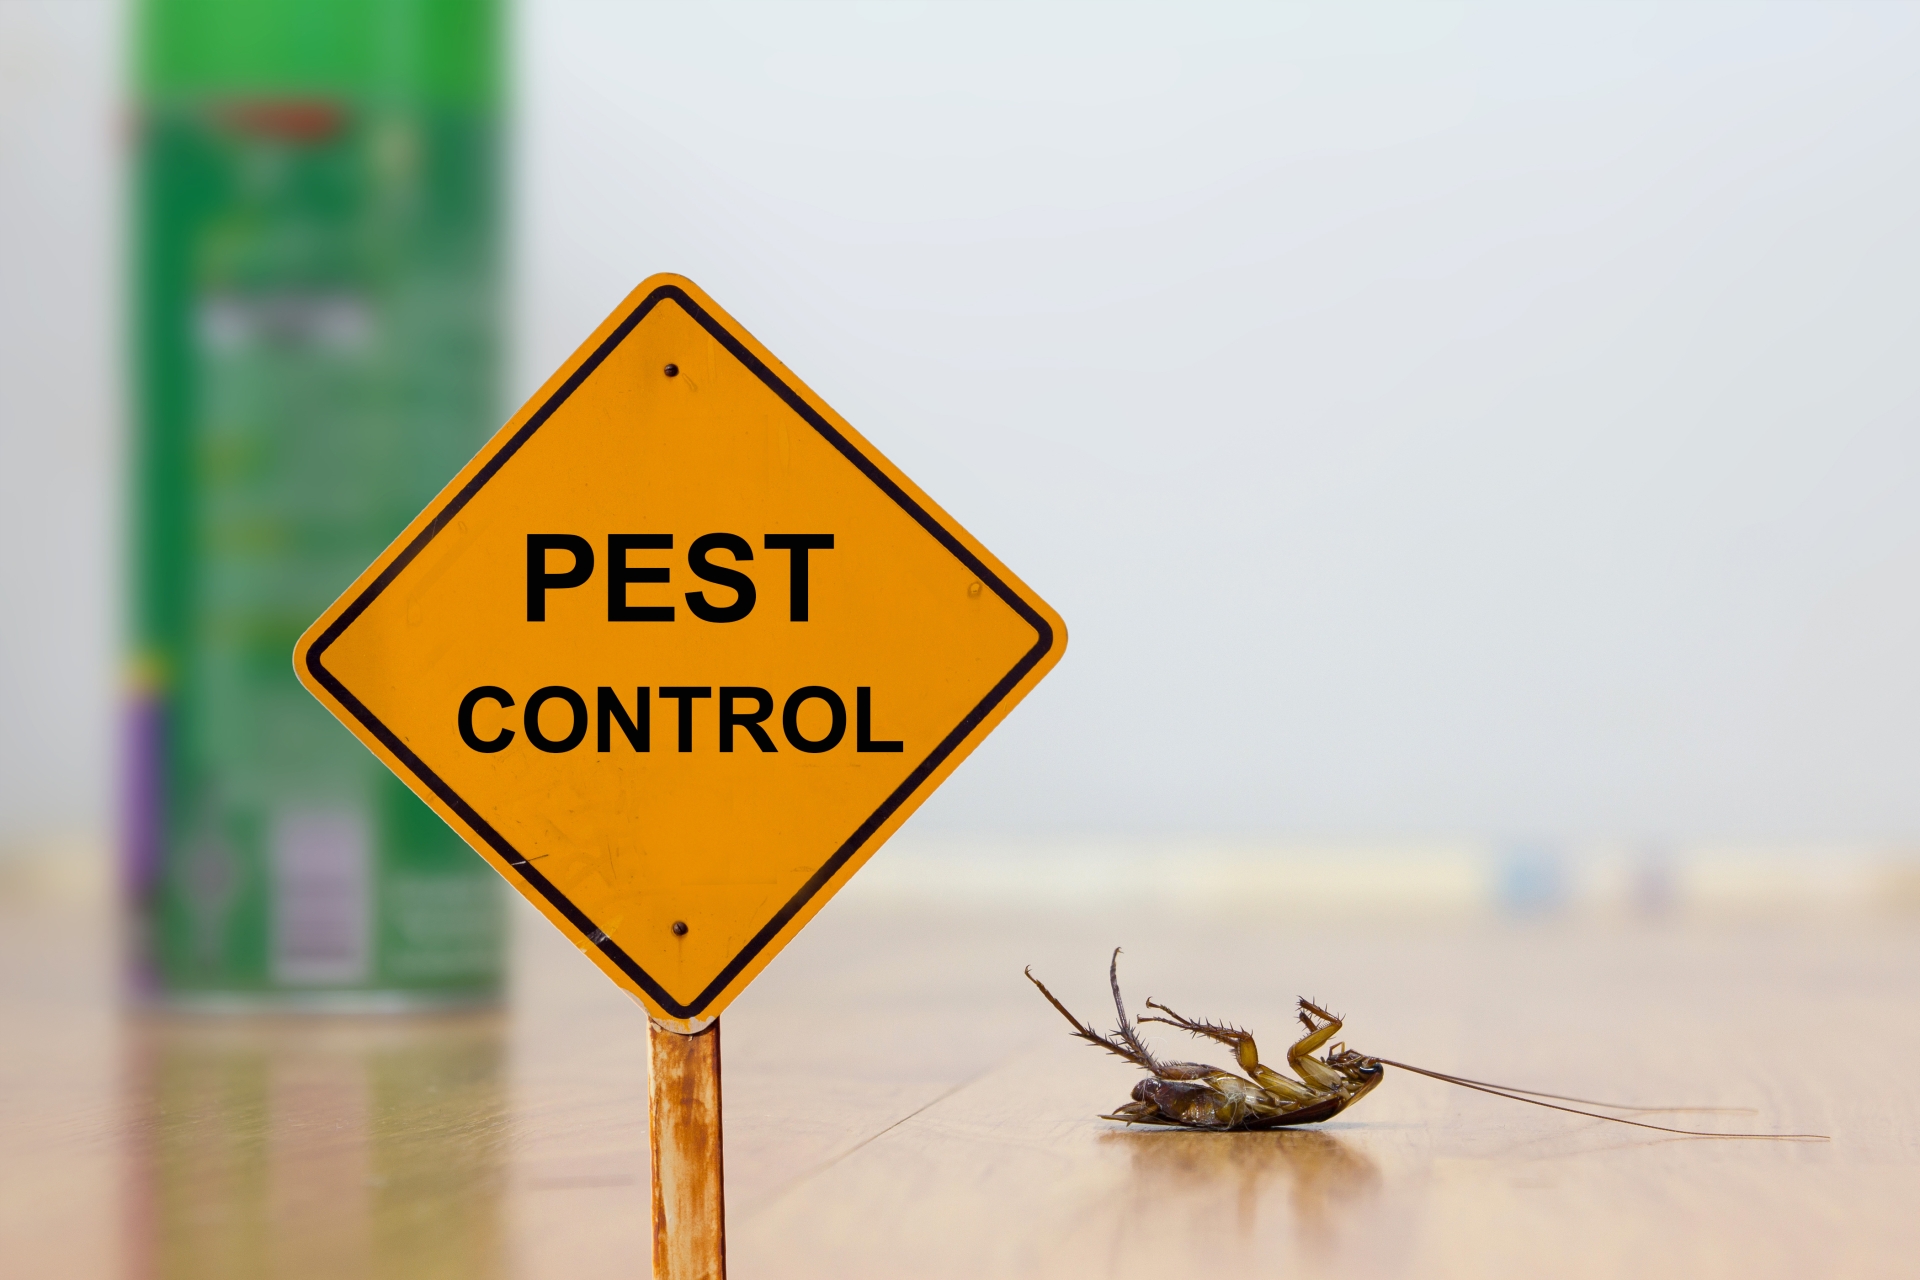 24 Hour Pest Control, Pest Control in Northwood, Moor Park, HA6. Call Now 020 8166 9746